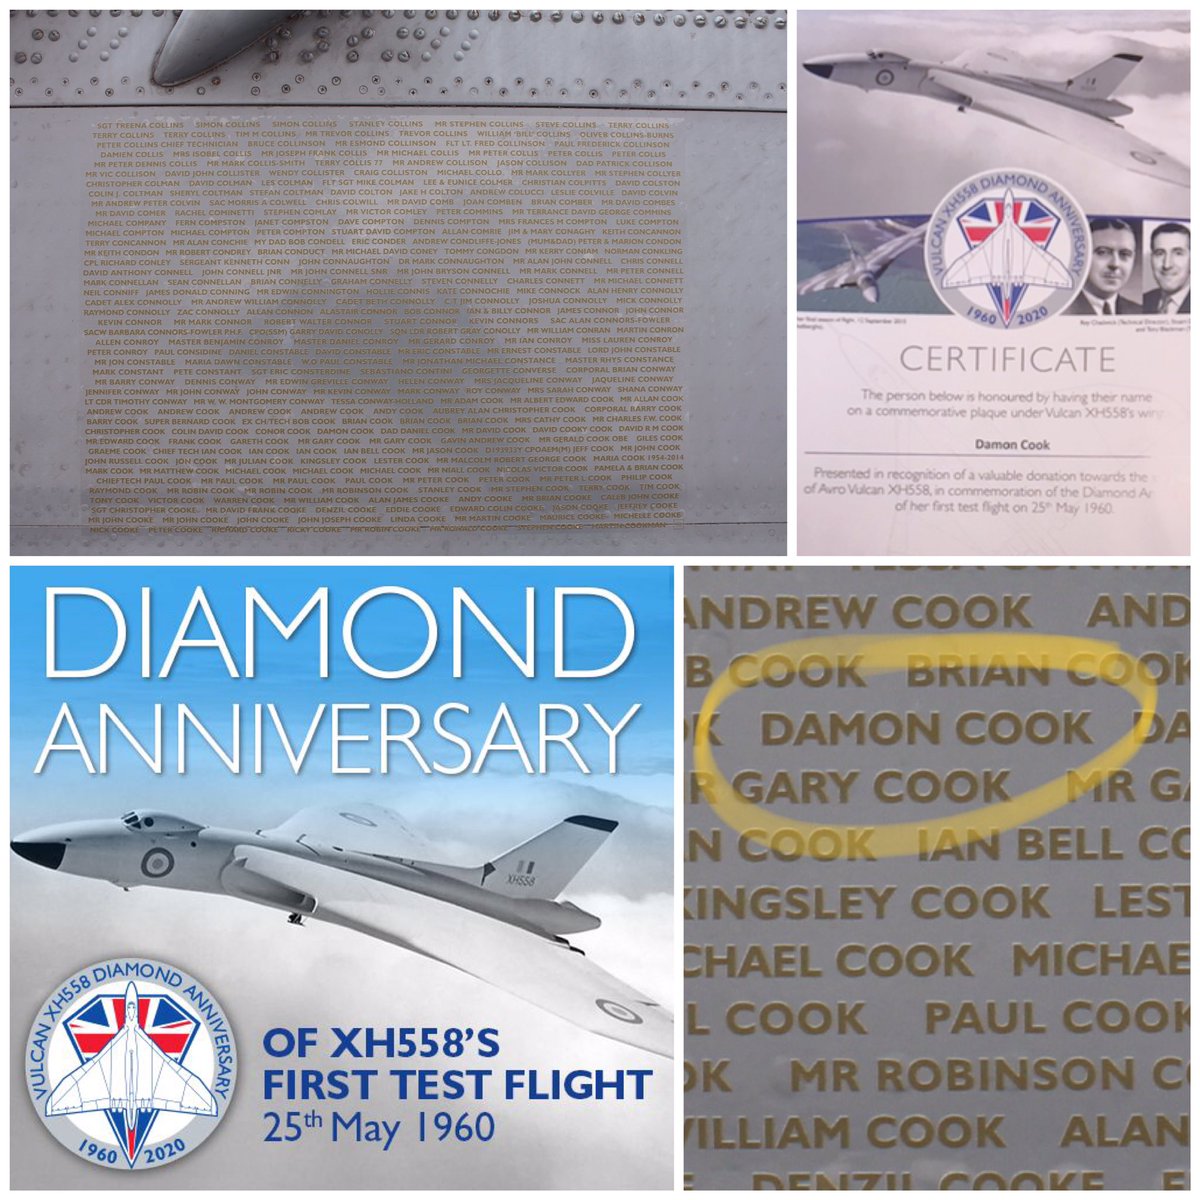 My name under the wing of the Vulcan XH558....Diamond Anniversary of the first test flight 1960-2020.....  @vulcantothesky #Vulcan60thAnniversary #DiamondAnniversary #VulcanXH558 #Vulcan #XH558 #NameUnderXH558sWing